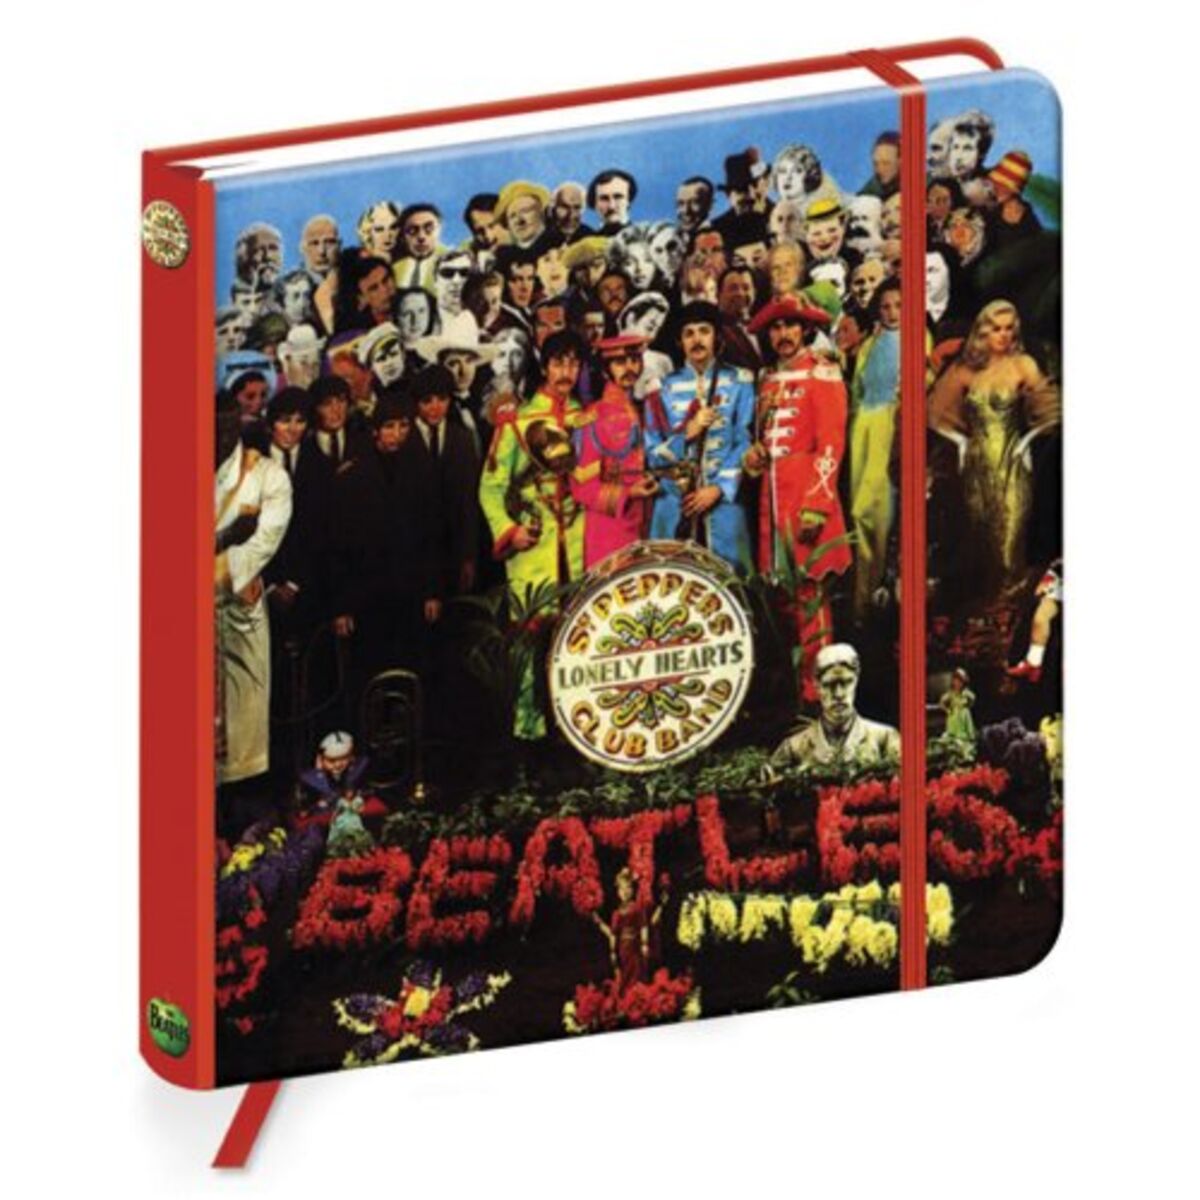 The-Beatles-Notebook-Sgt-Peppe